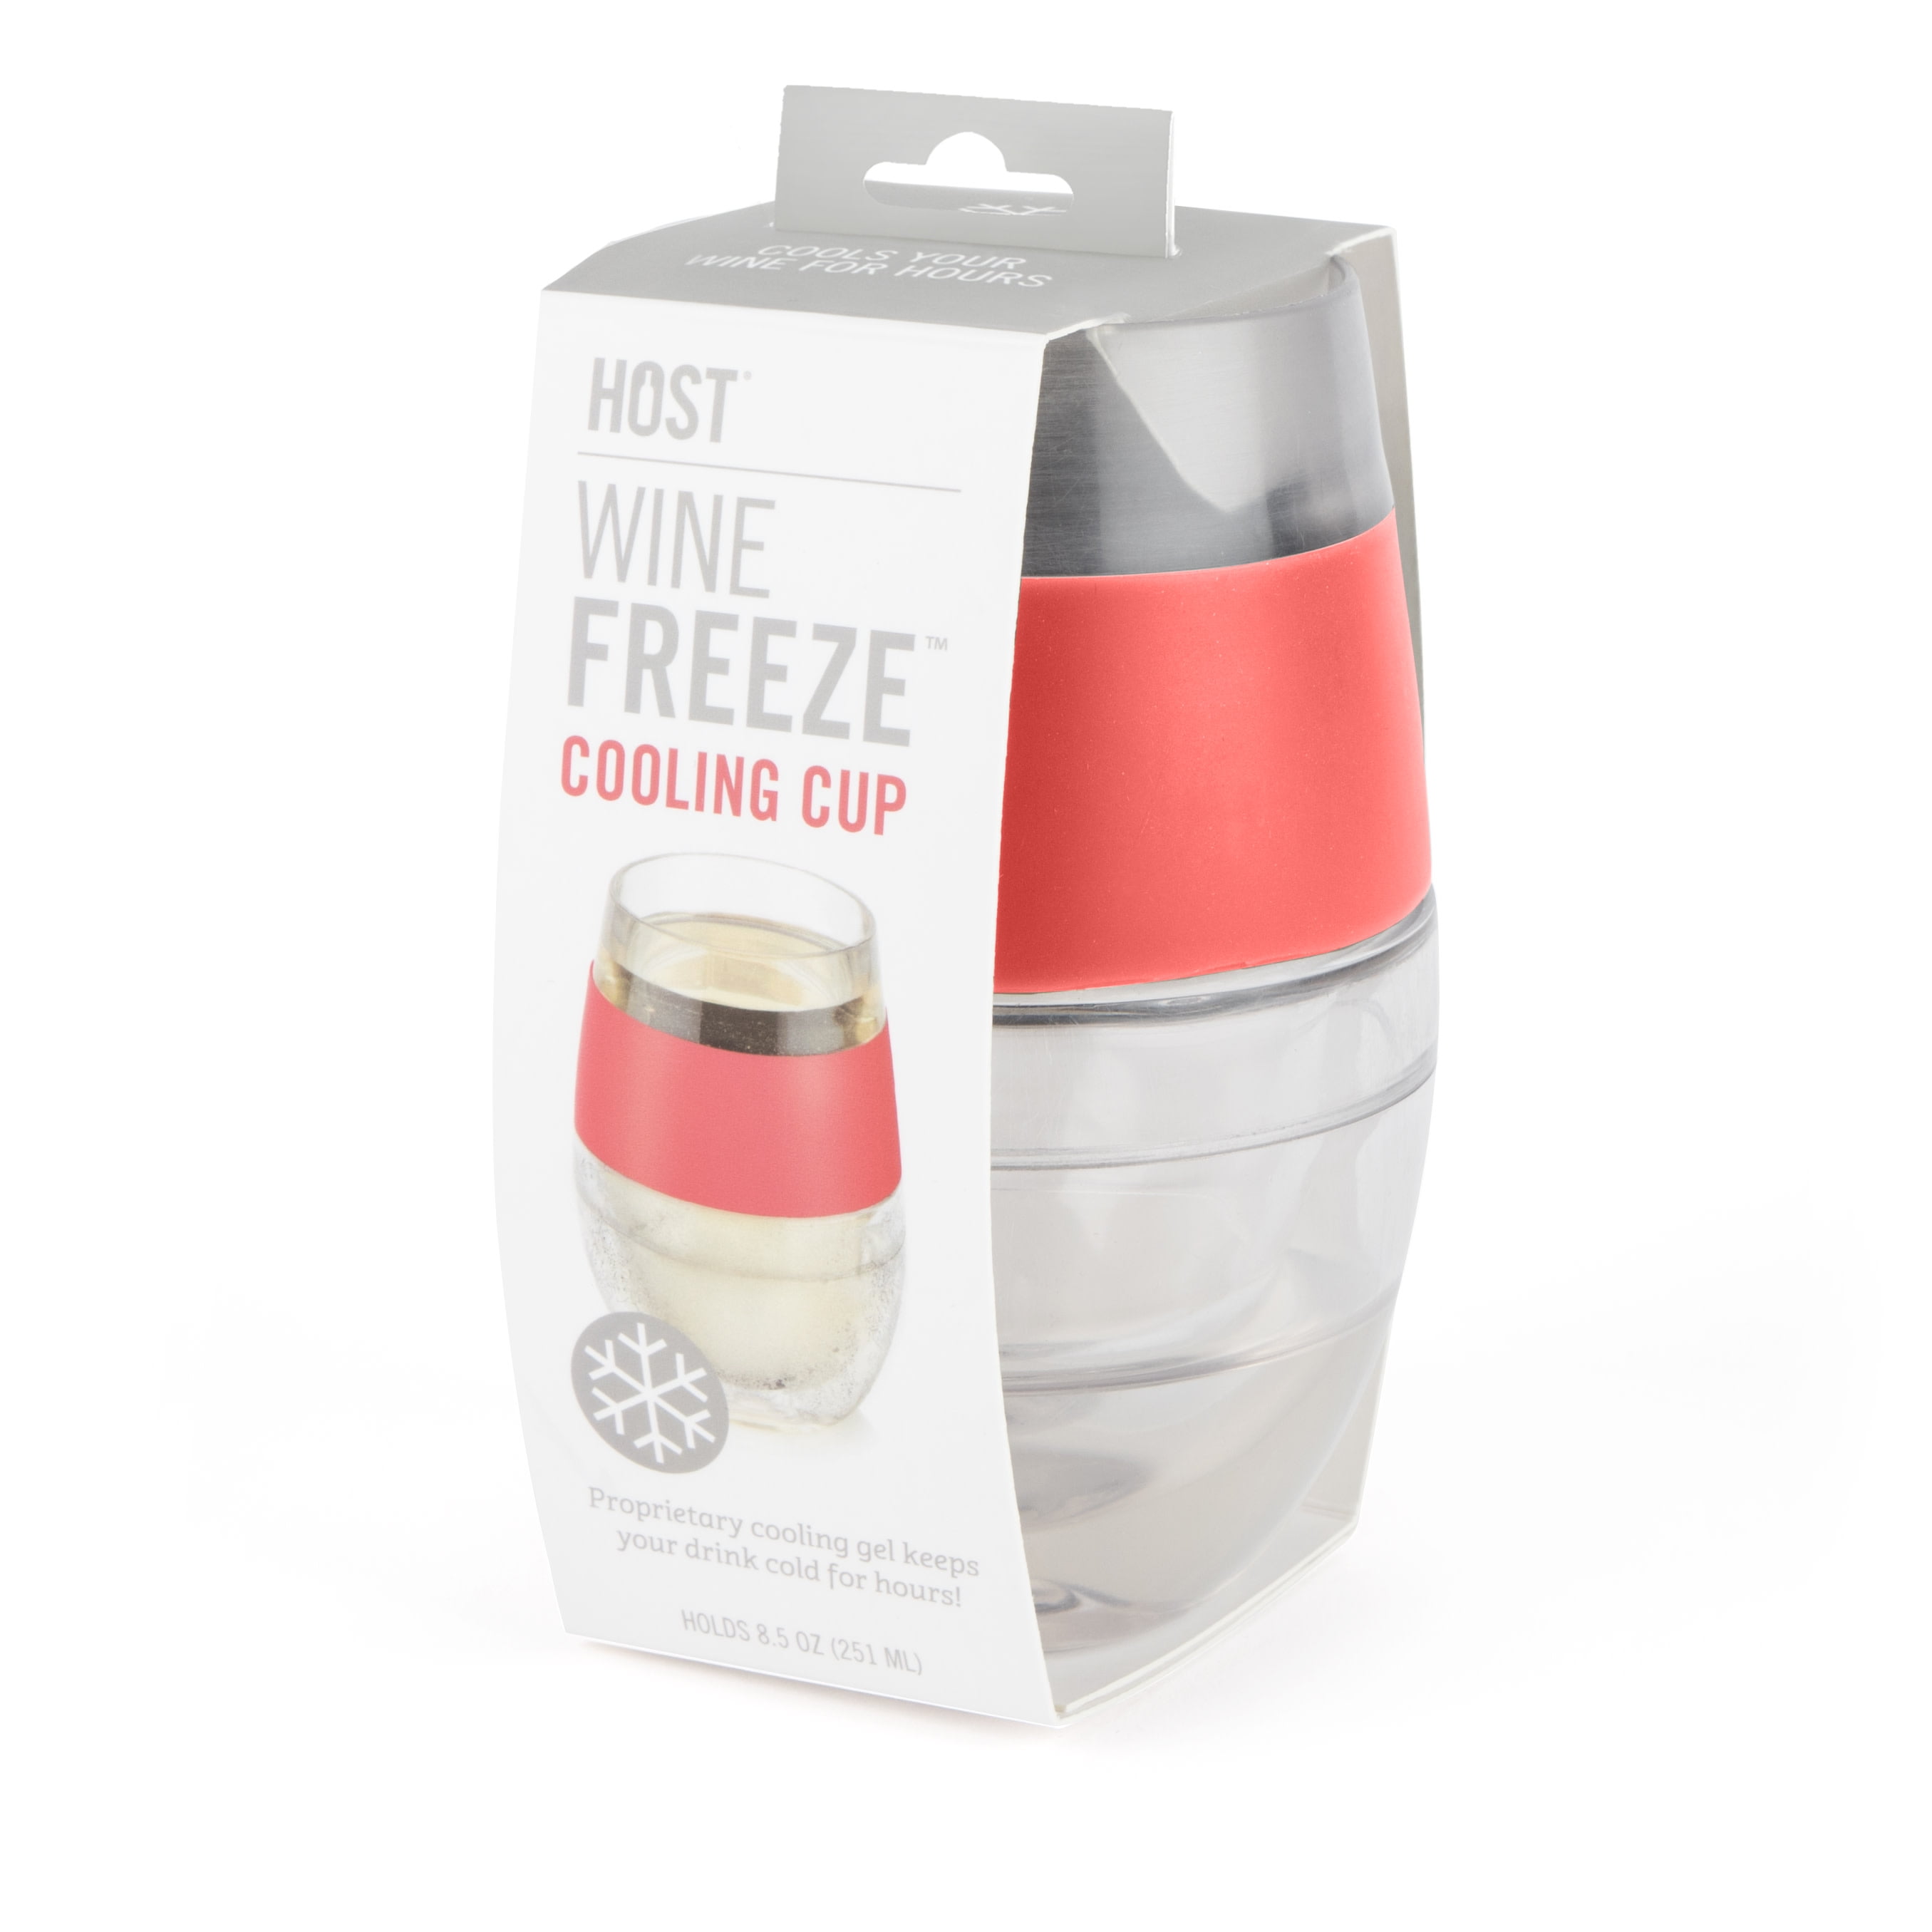 HOST Wine FREEZE Stemmed Cooling Cups (set of 2) in Marble, 1 Pack -  Dillons Food Stores